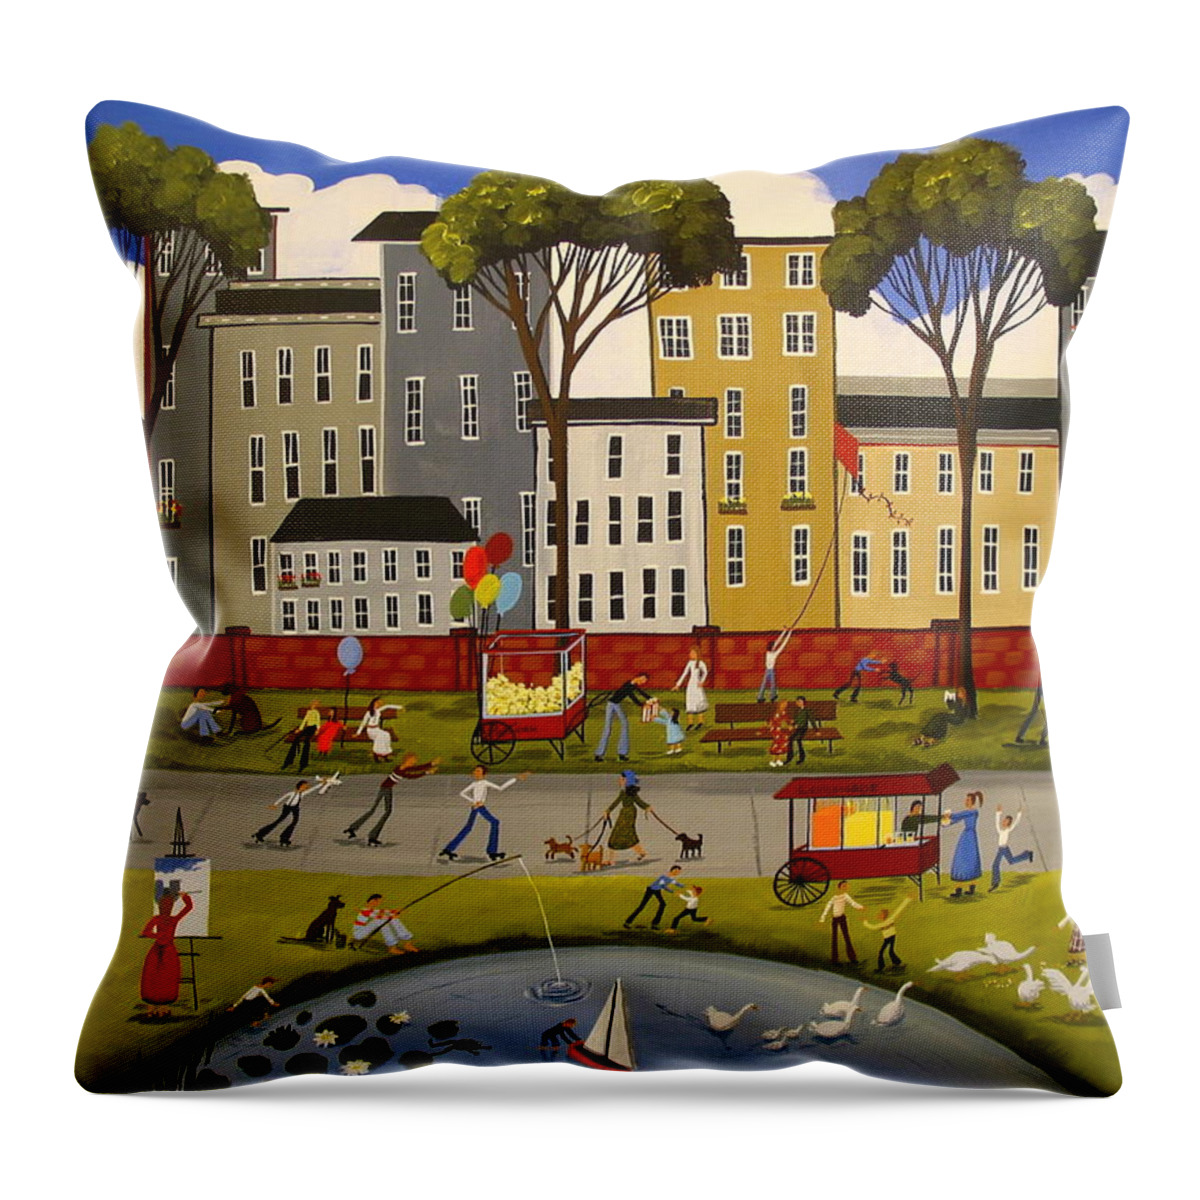 Folk Art Throw Pillow featuring the painting City Park by Debbie Criswell